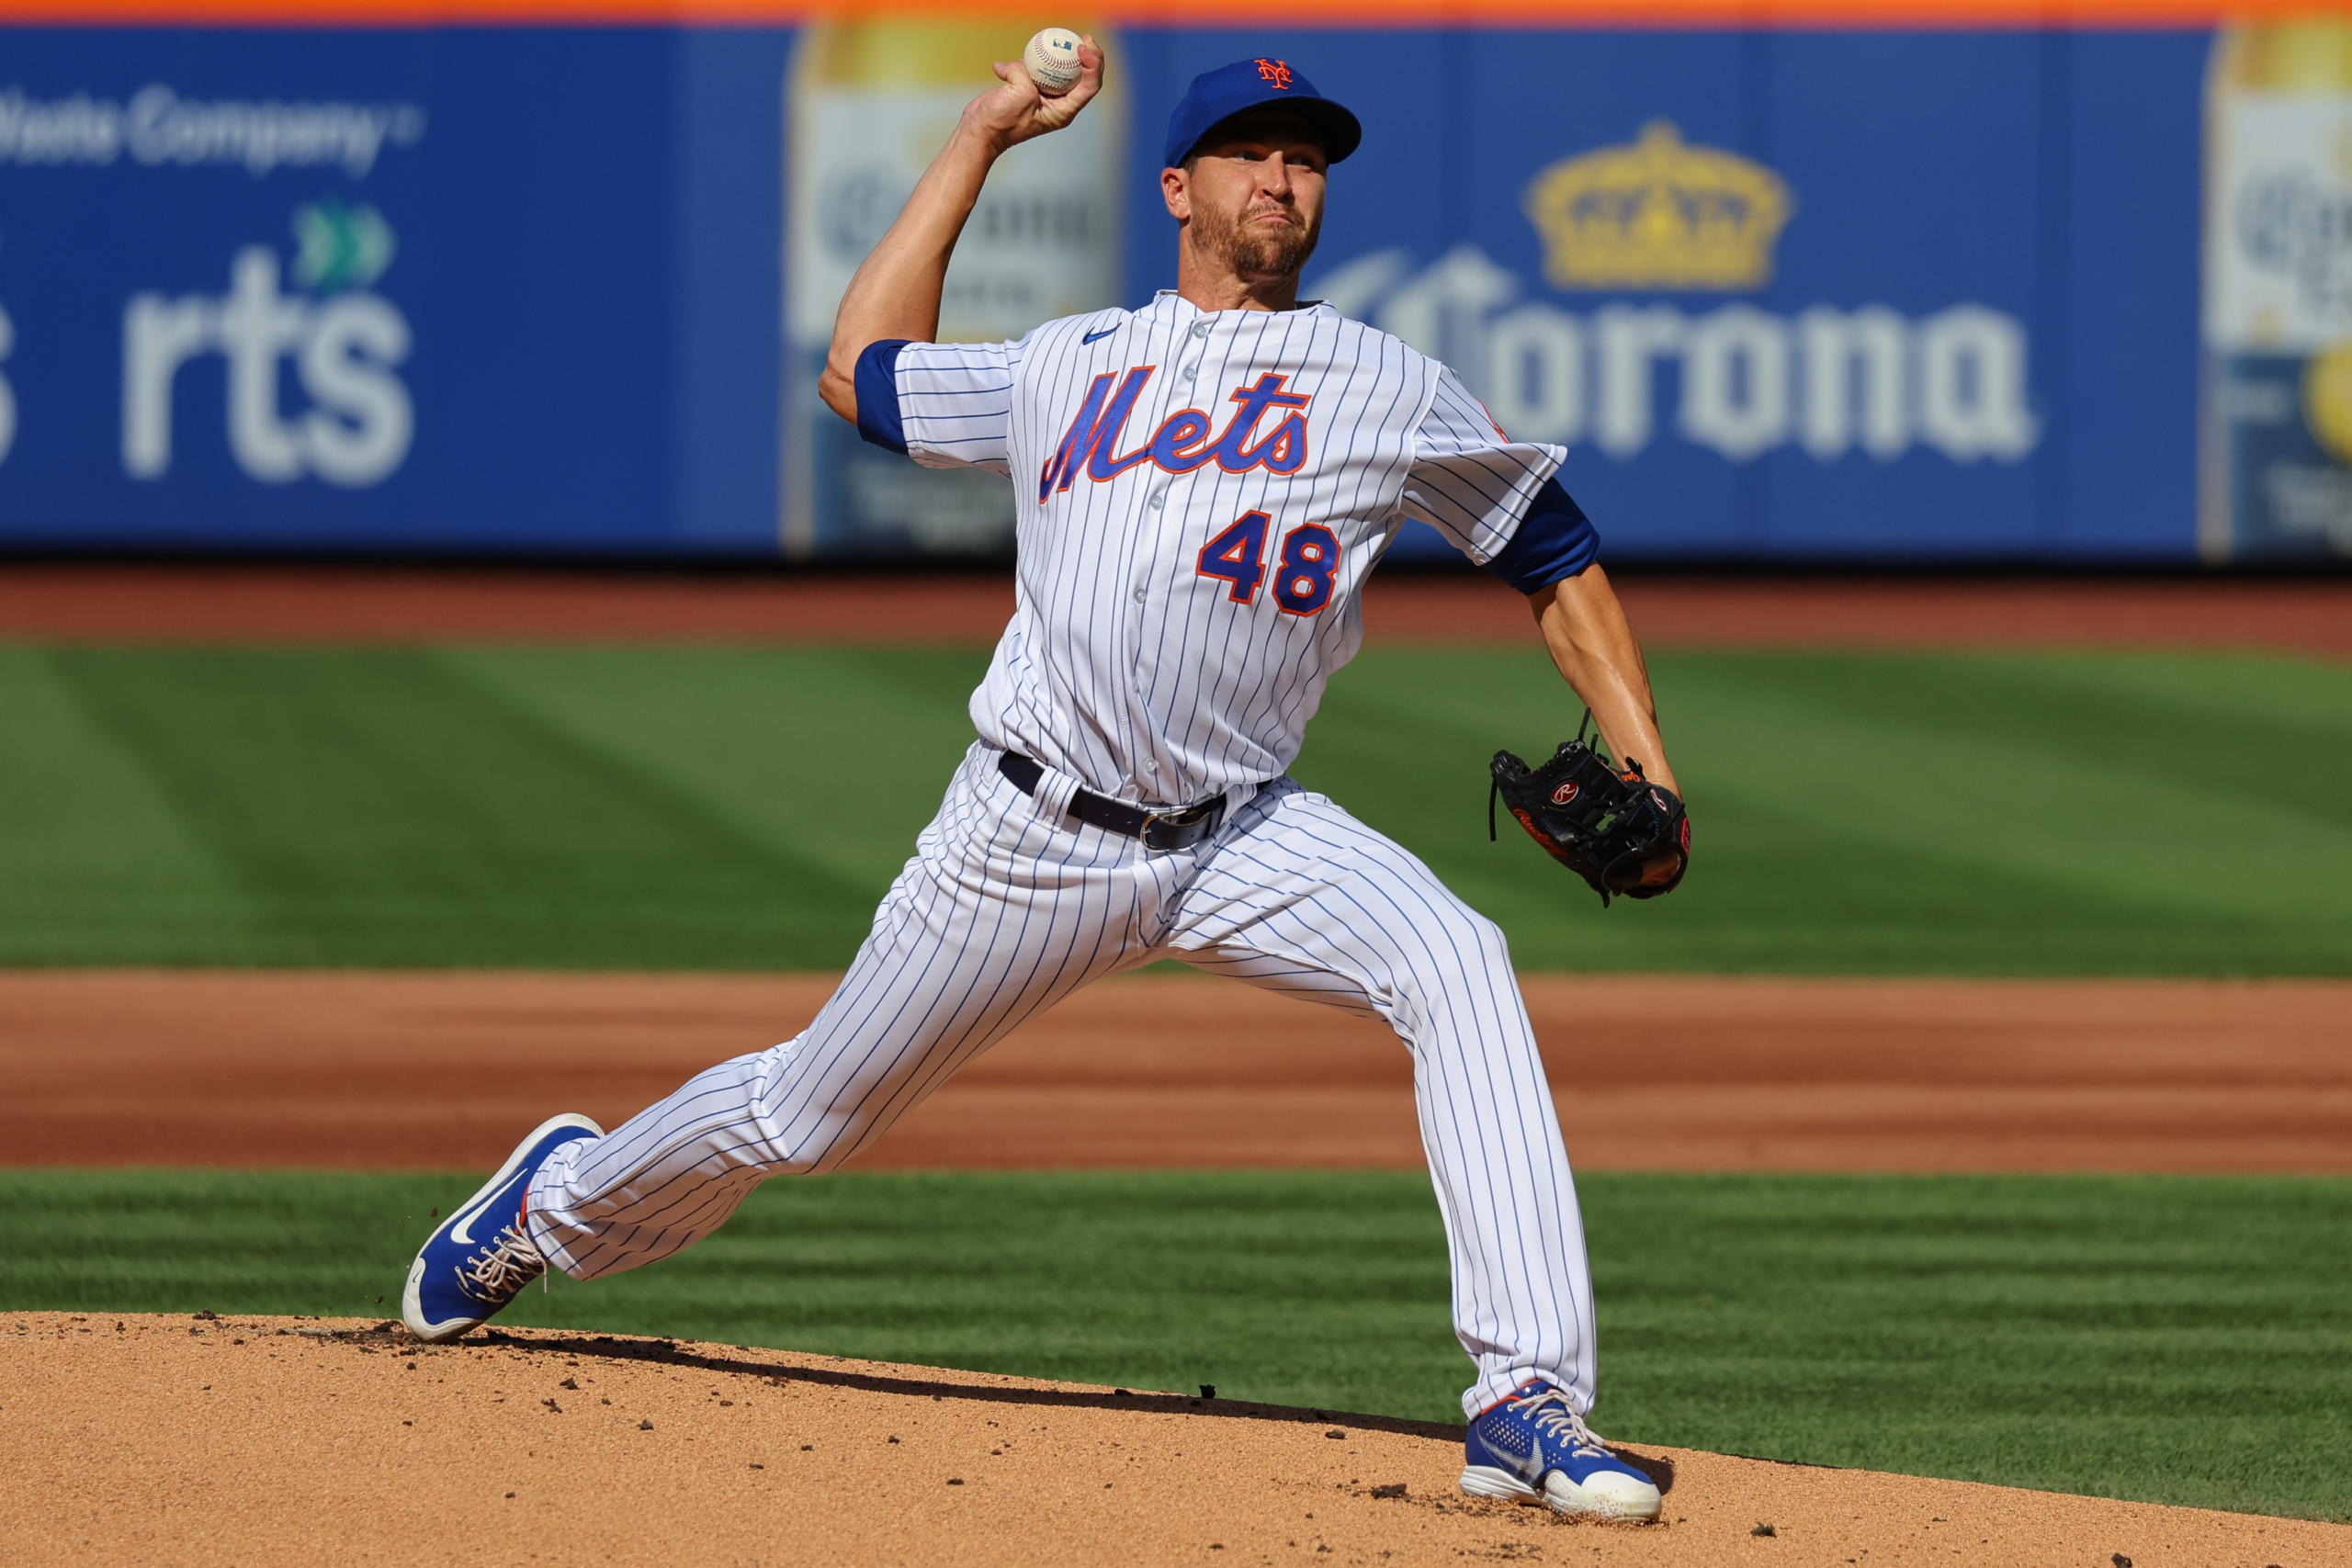 Atlanta Braves unlikely to add Jacob deGrom or other top-end MLB free agents